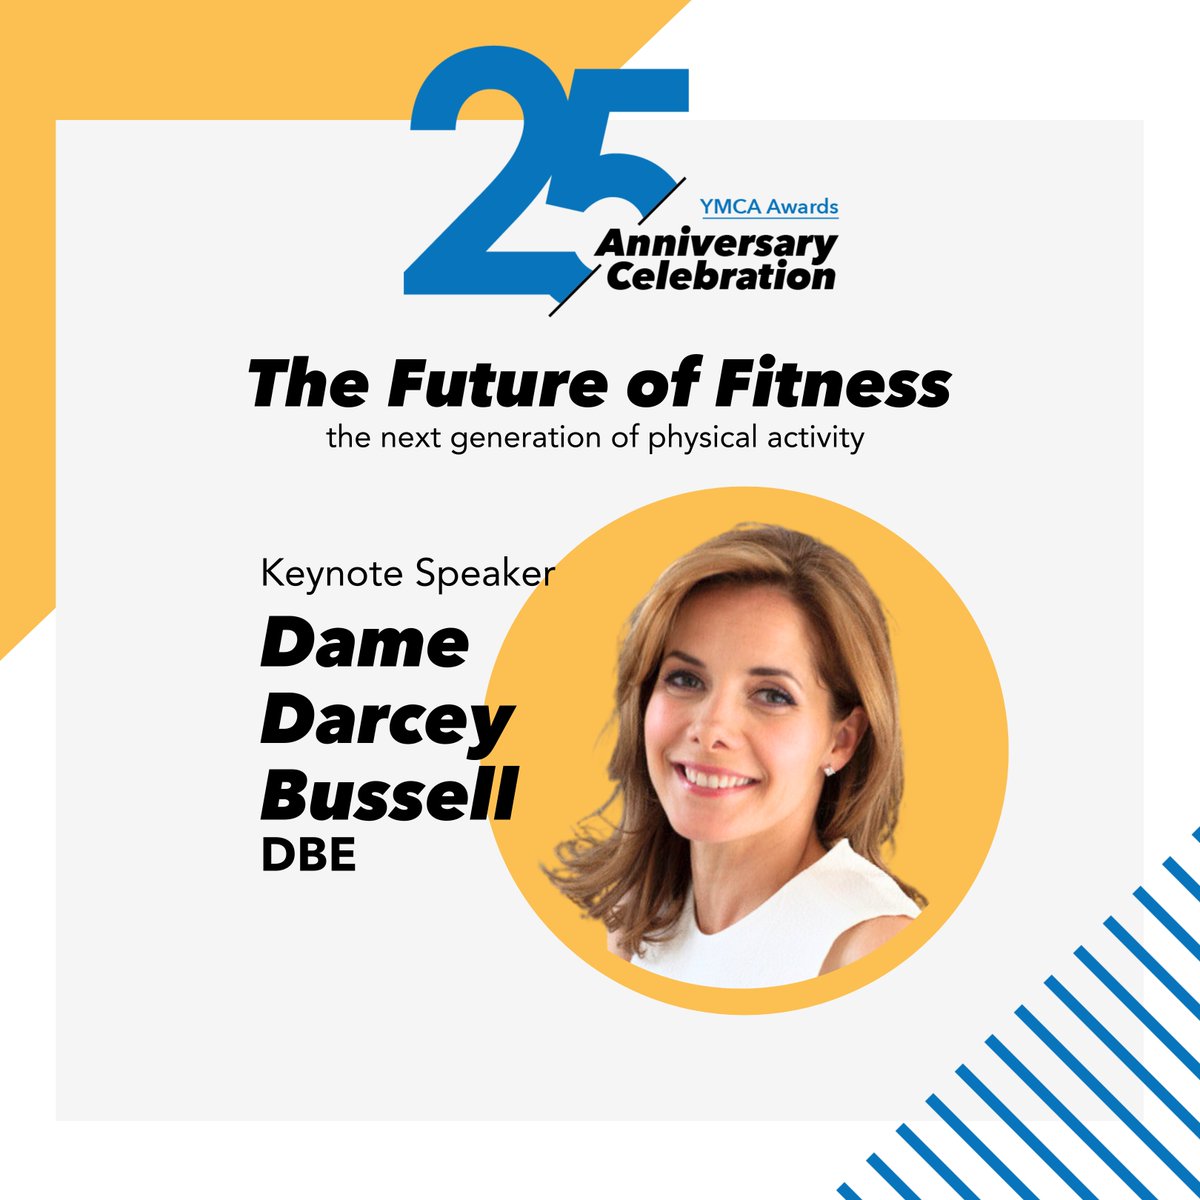 Our 25th Anniversary is just around the corner! We’ll host an evening at House of Commons with a lineup of inspiring industry leaders discussing the future of fitness. Our first keynote speaker is @darceyofficial, former Principal of @theroyalballet and @bbcstrictly judge.